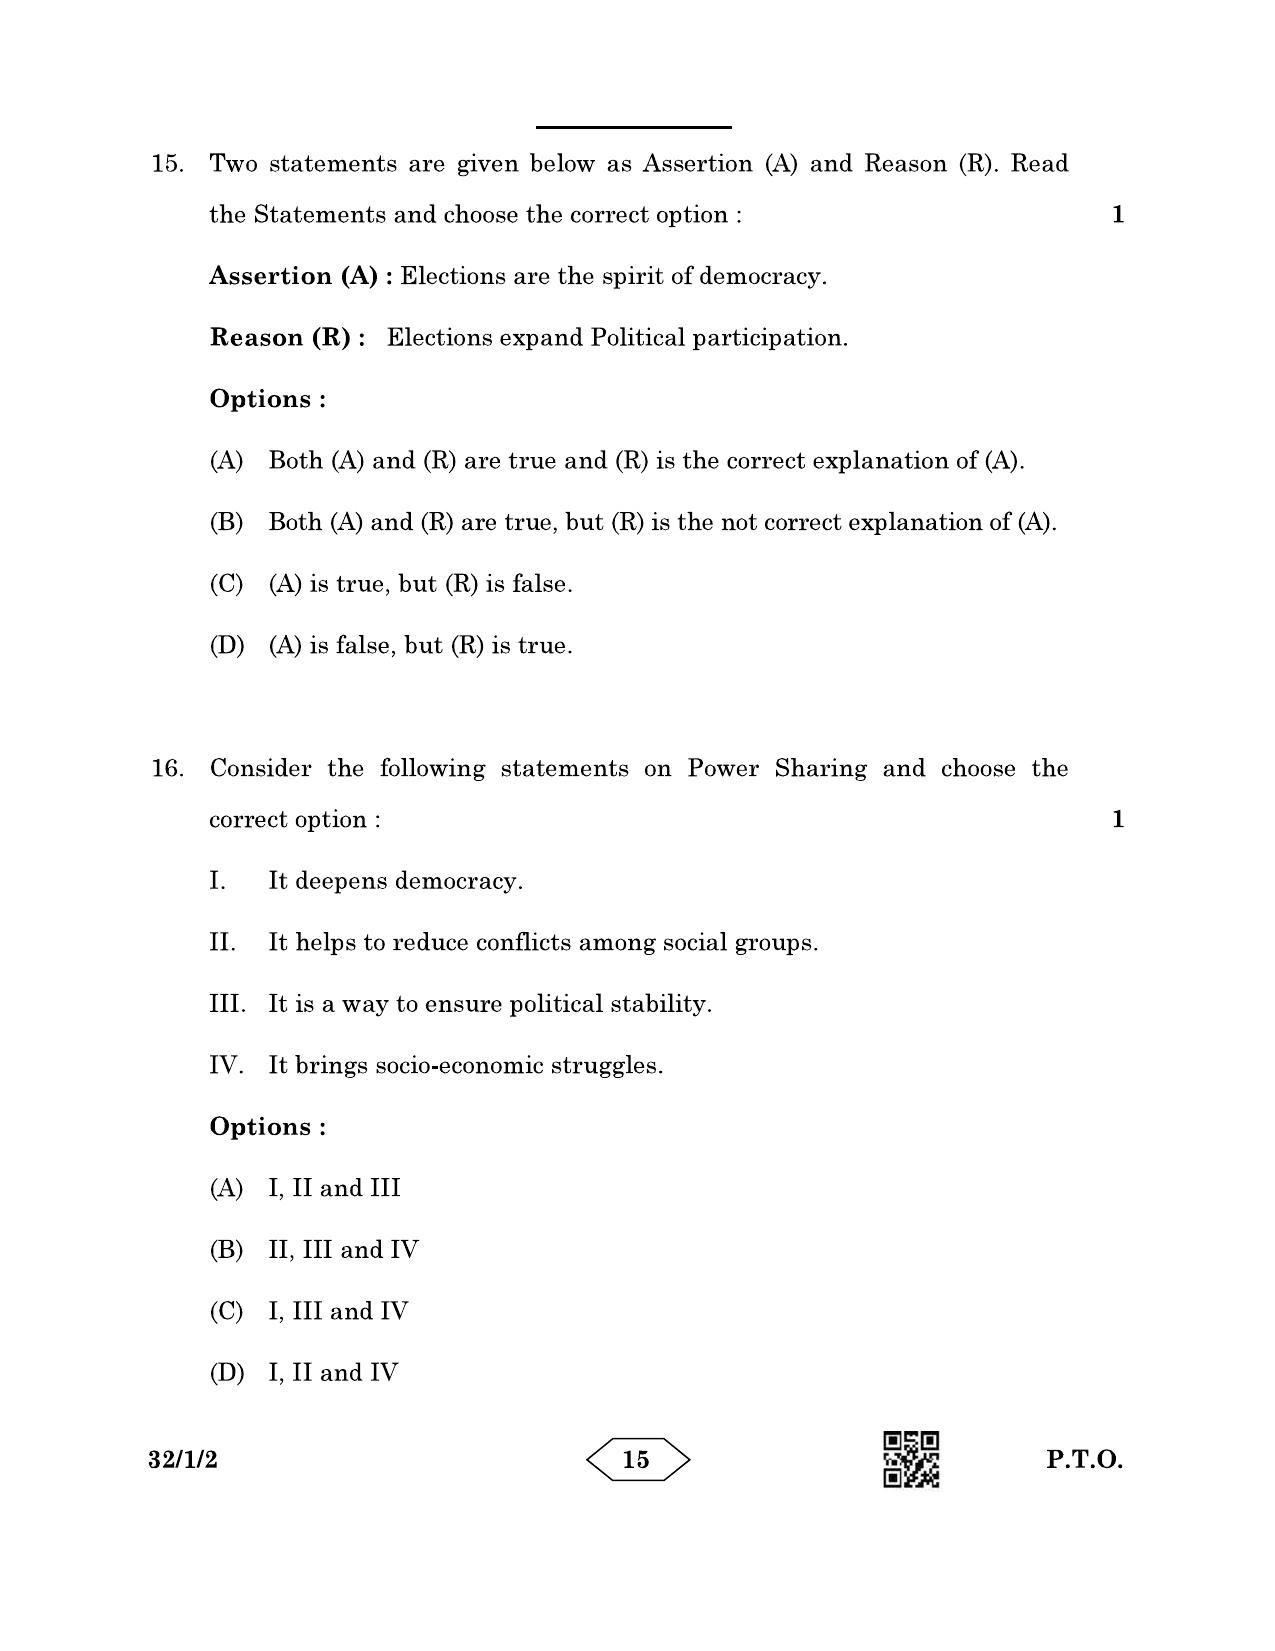 CBSE Class 10 32-1-2 Social Science 2023 Question Paper - Page 15